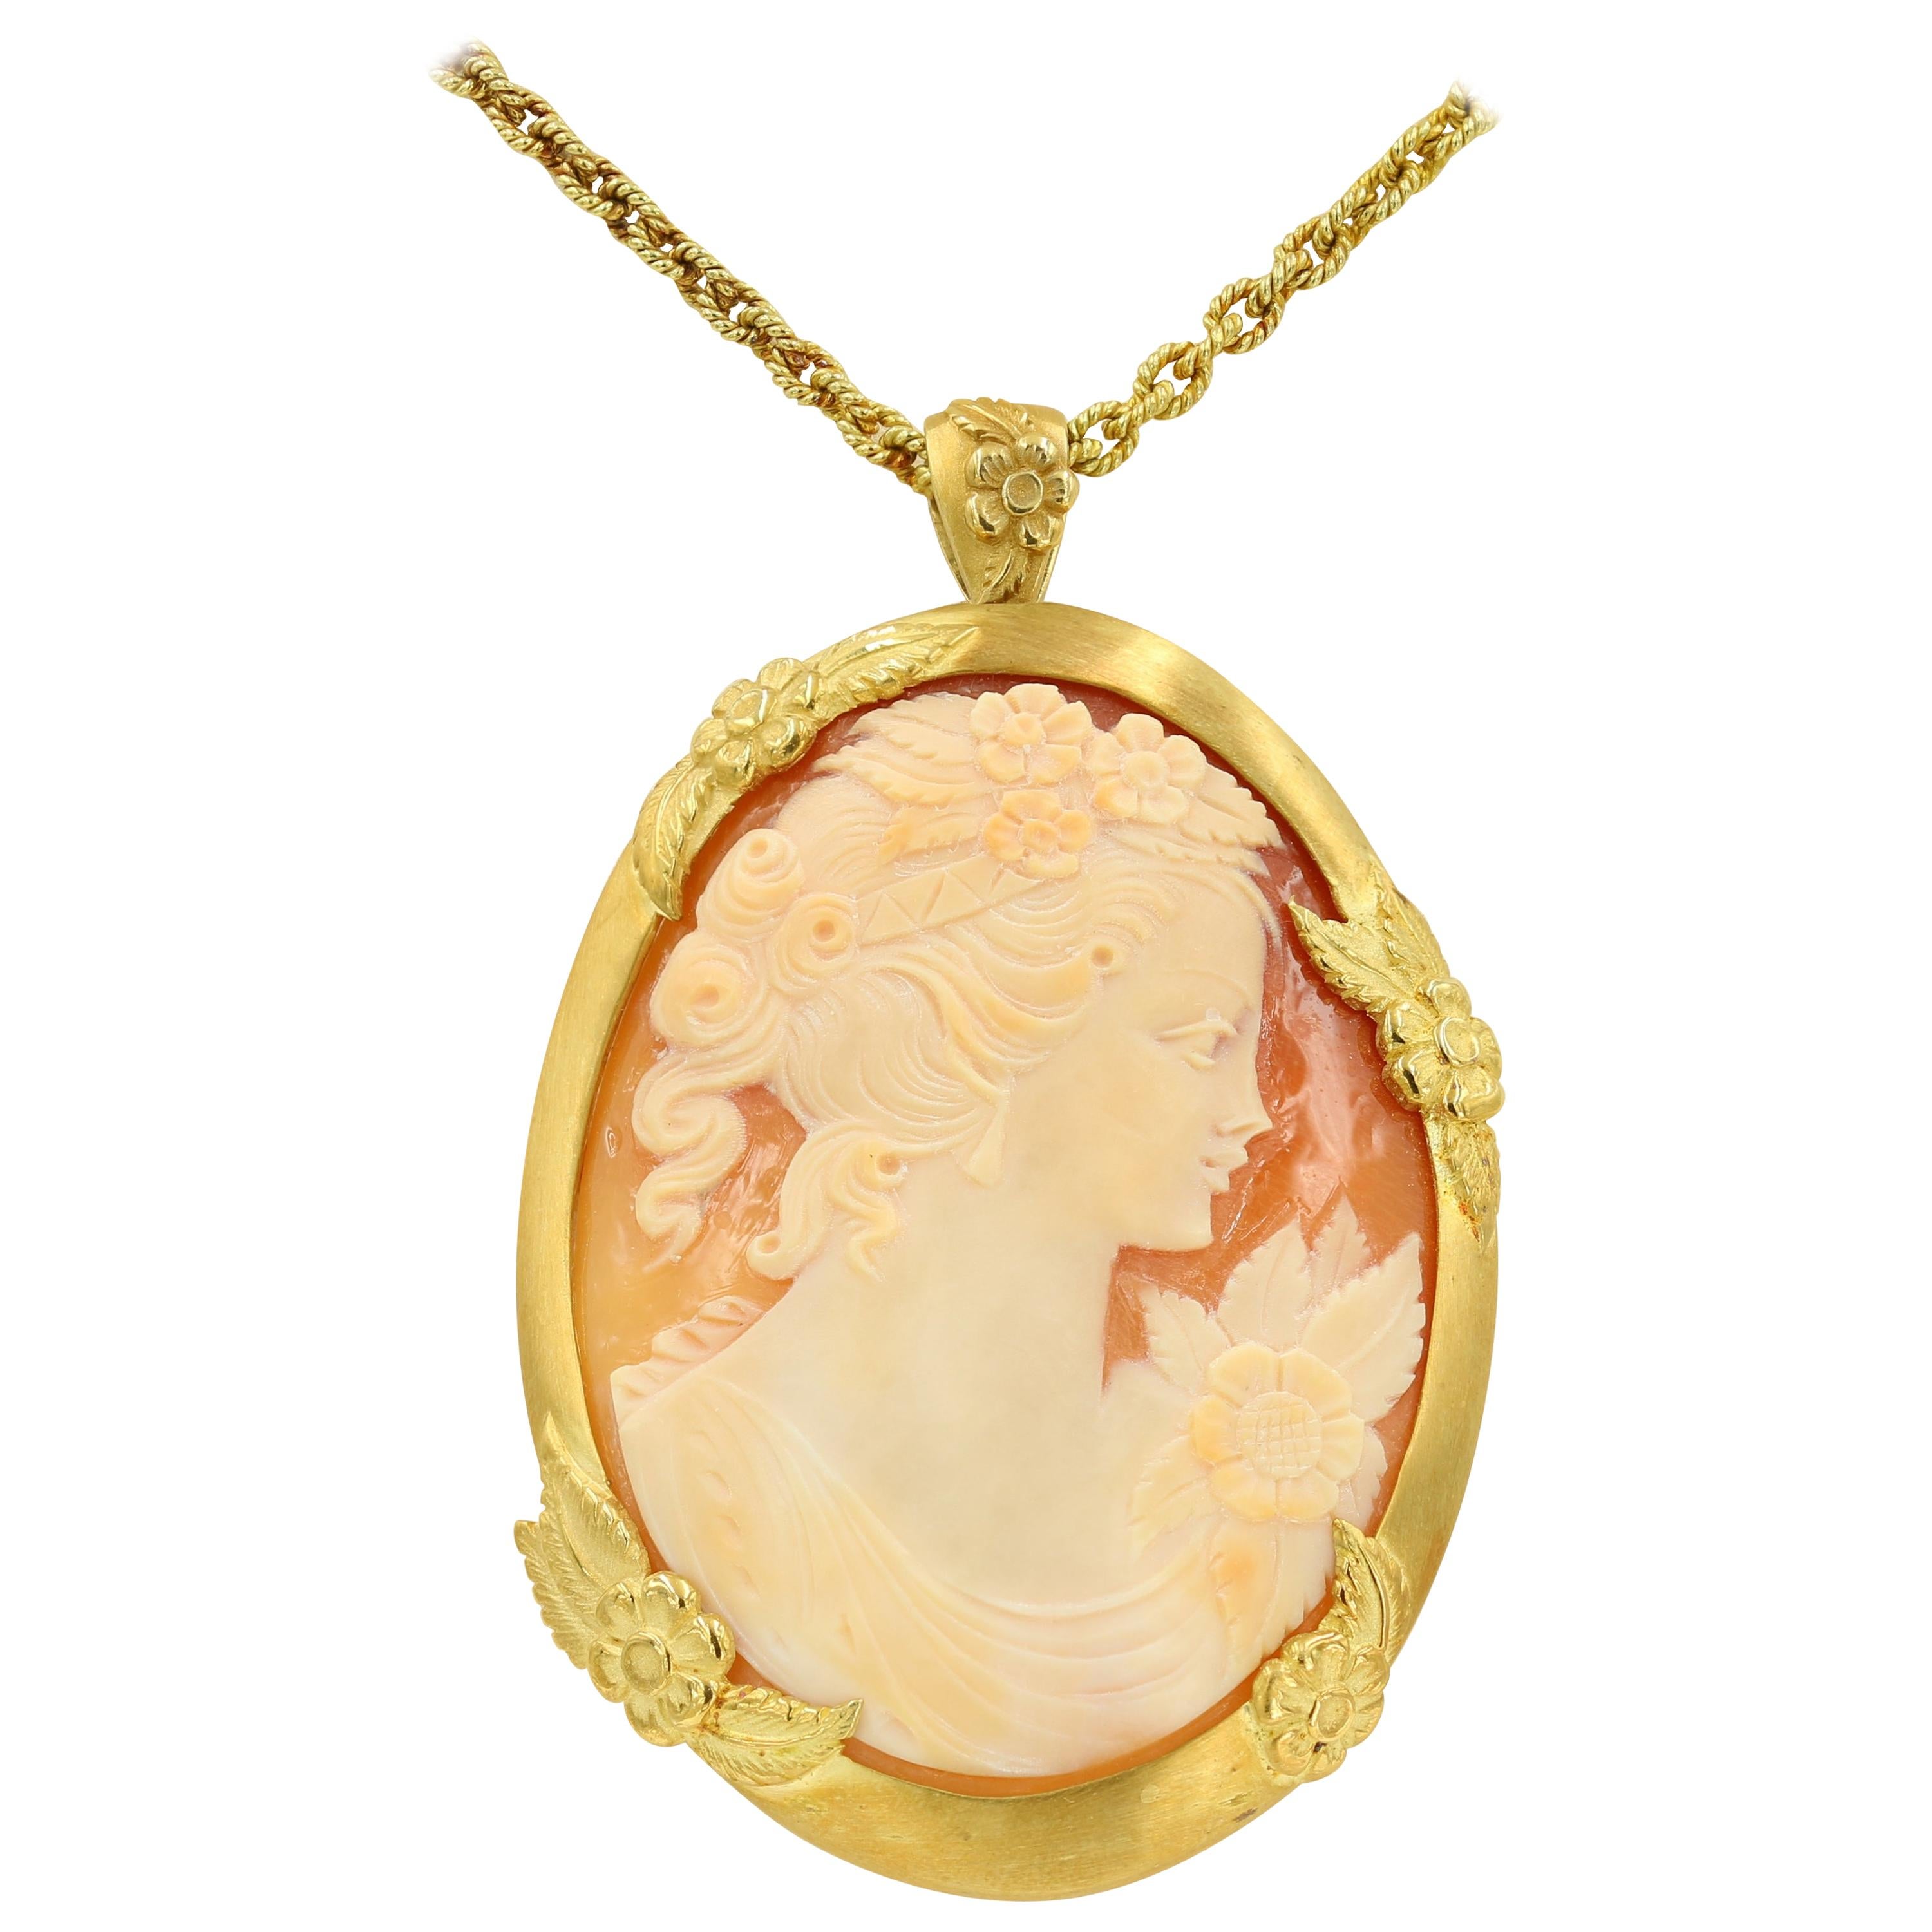 Lester Lampert One of a Kind Cameo Pin/Pendant in 18 Karat Yellow Gold For Sale